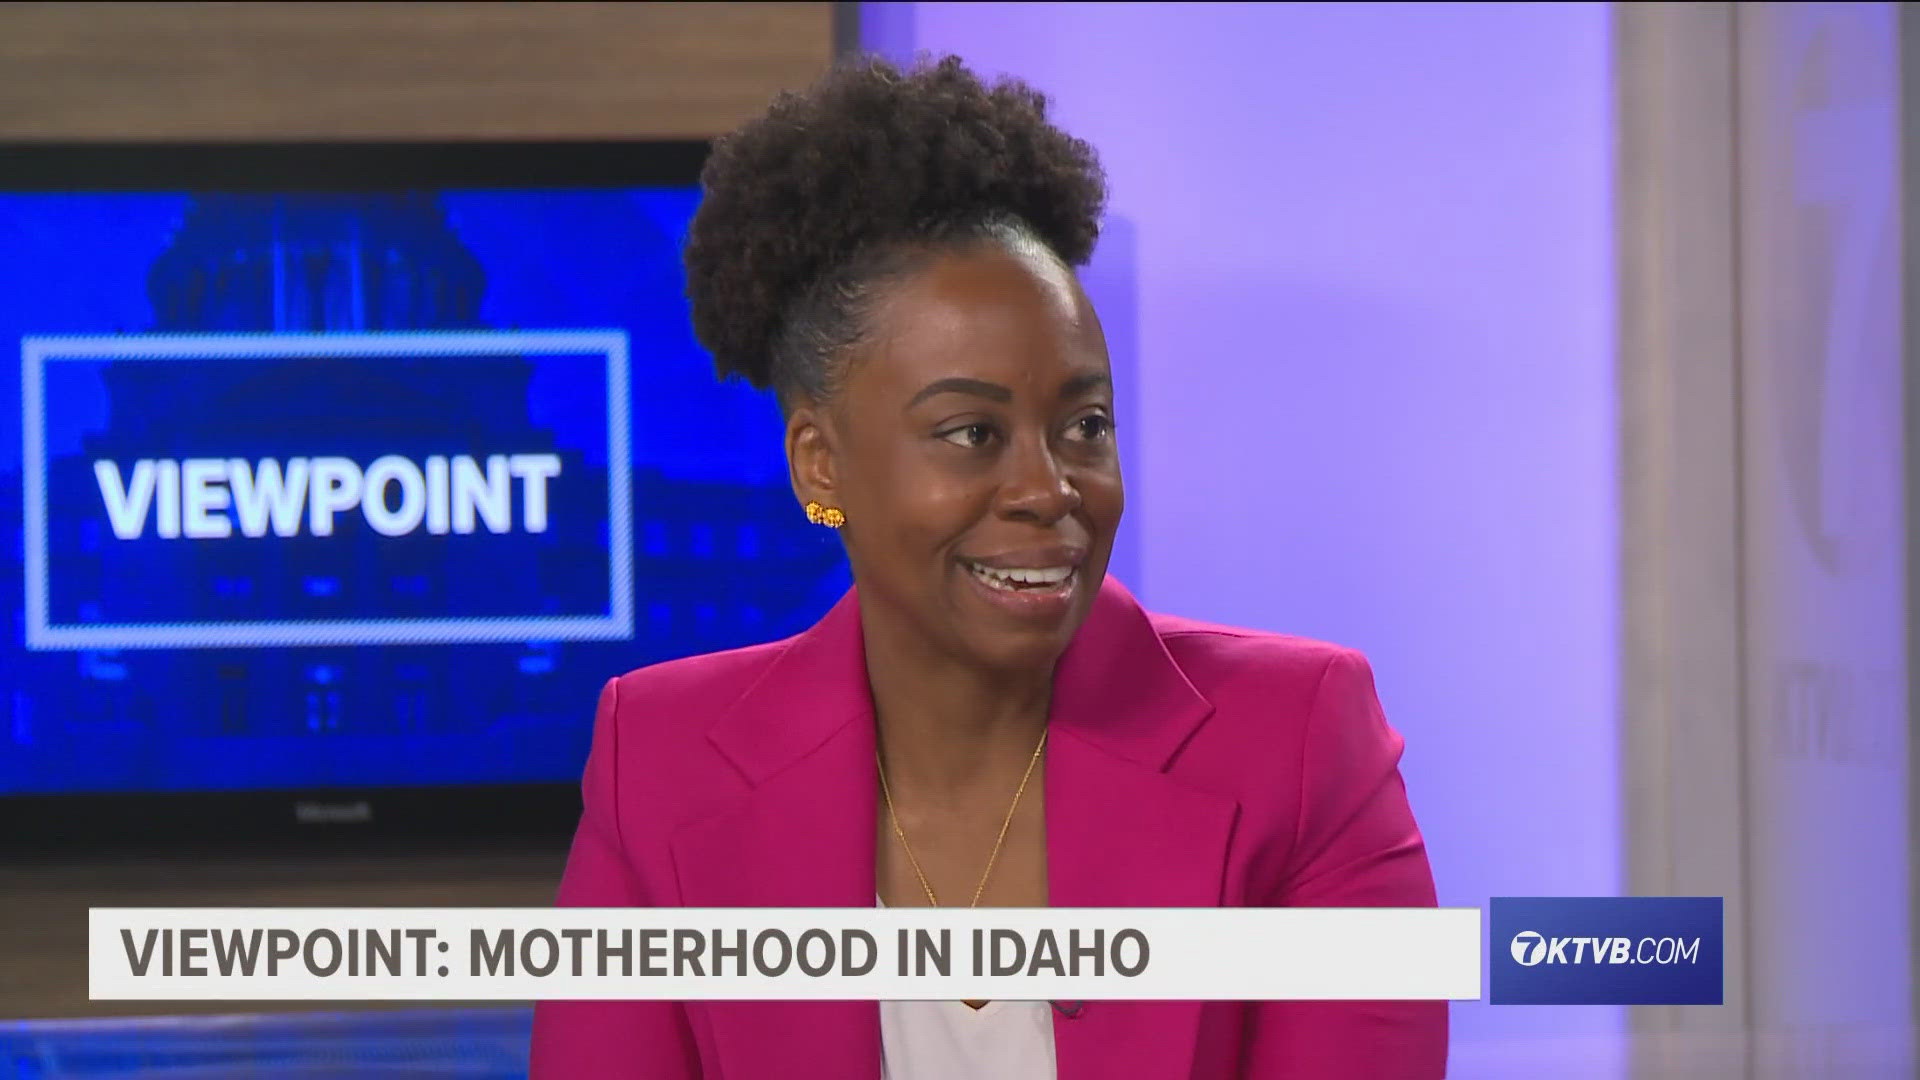 Gallup polling and Idaho group Supreme Moms released a report and analysis with data from over 4,000 Idahoans on the roles, experiences and needs of mothers in Idaho